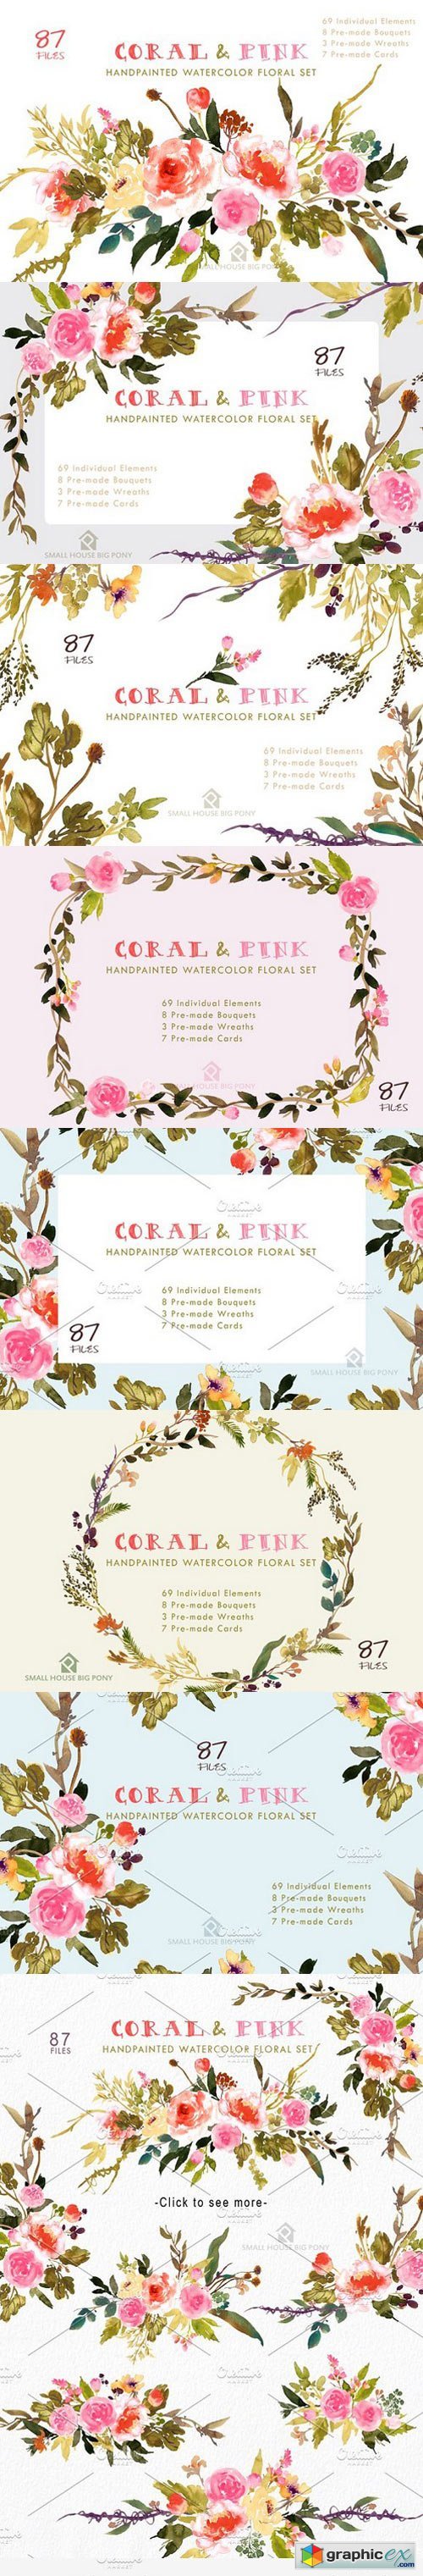 Coral & Pink - Flower Collection